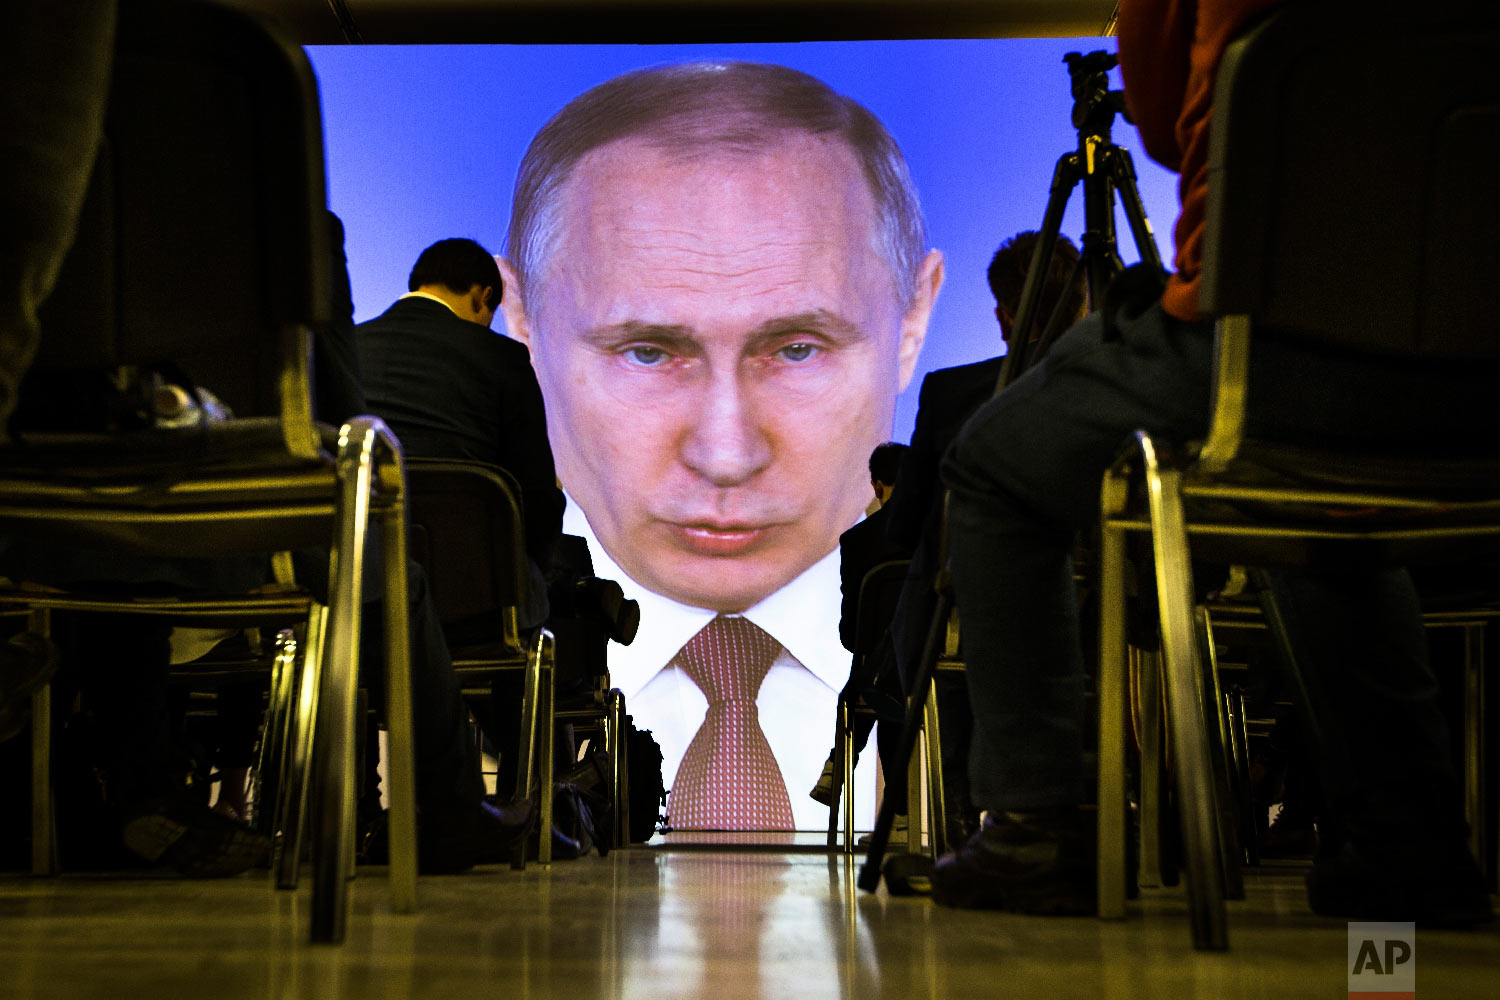  Journalists watch as Russian President Vladimir Putin gives his annual state of the nation address in Manezh in Moscow, Russia, on March 1, 2018. (AP Photo/Alexander Zemlianichenko) 